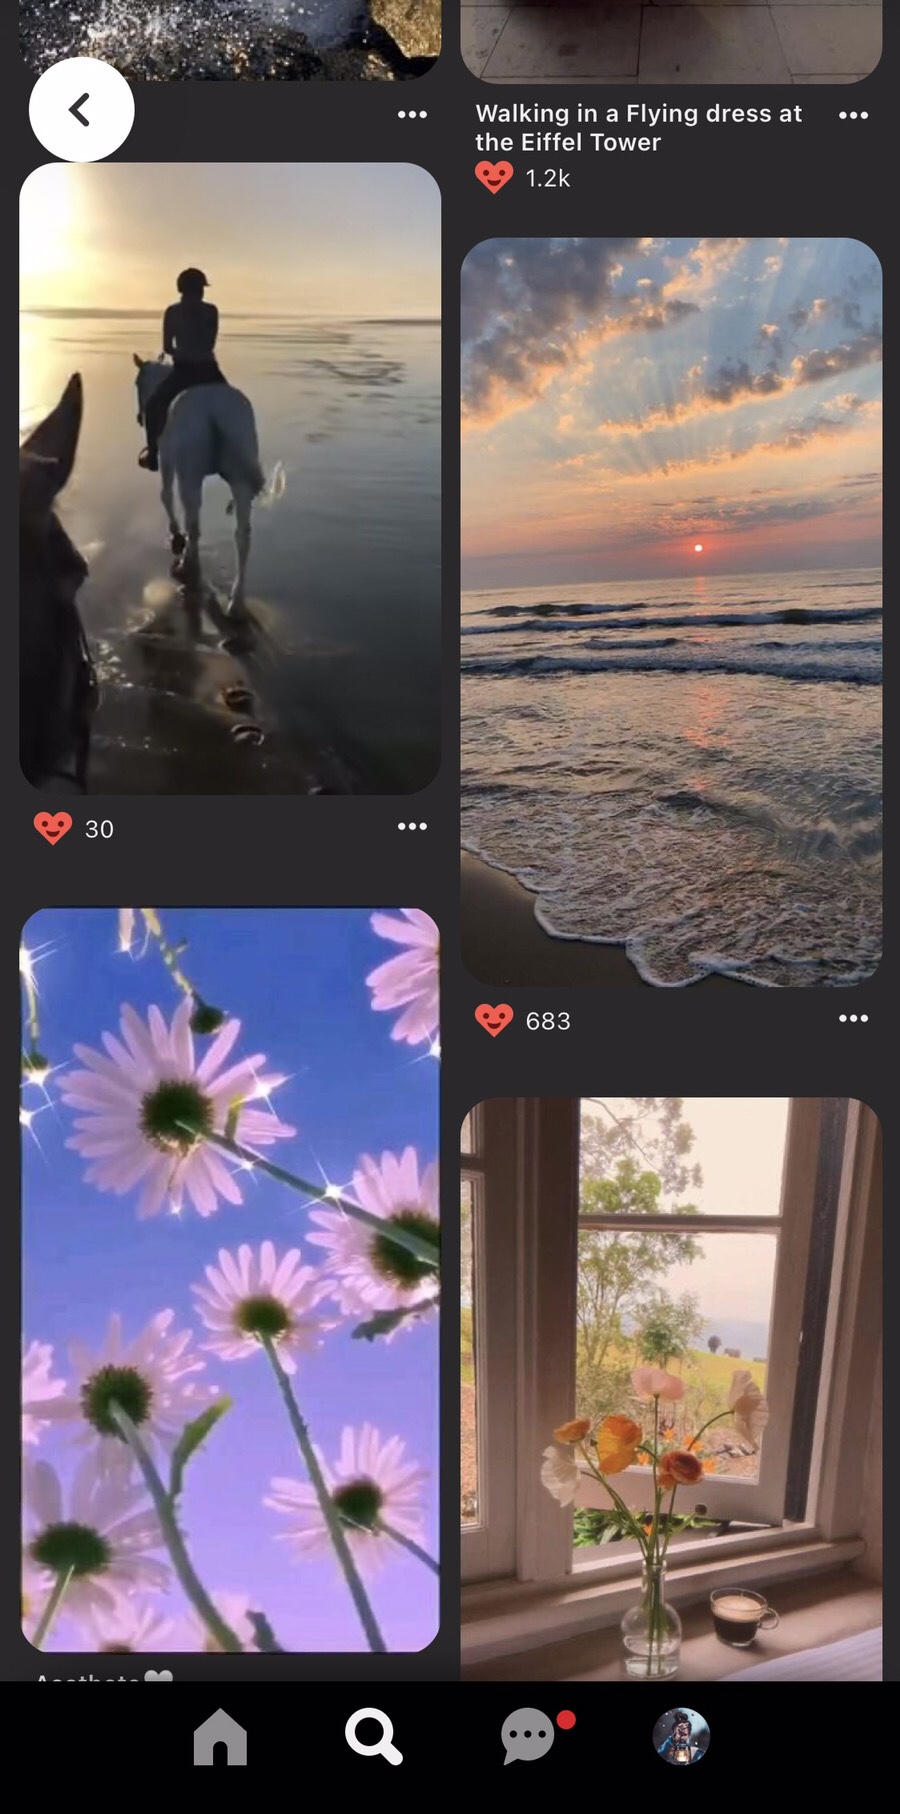 To download Pinterest videos on iPhone, open the “Pinterest” app, then choose your favorite video.